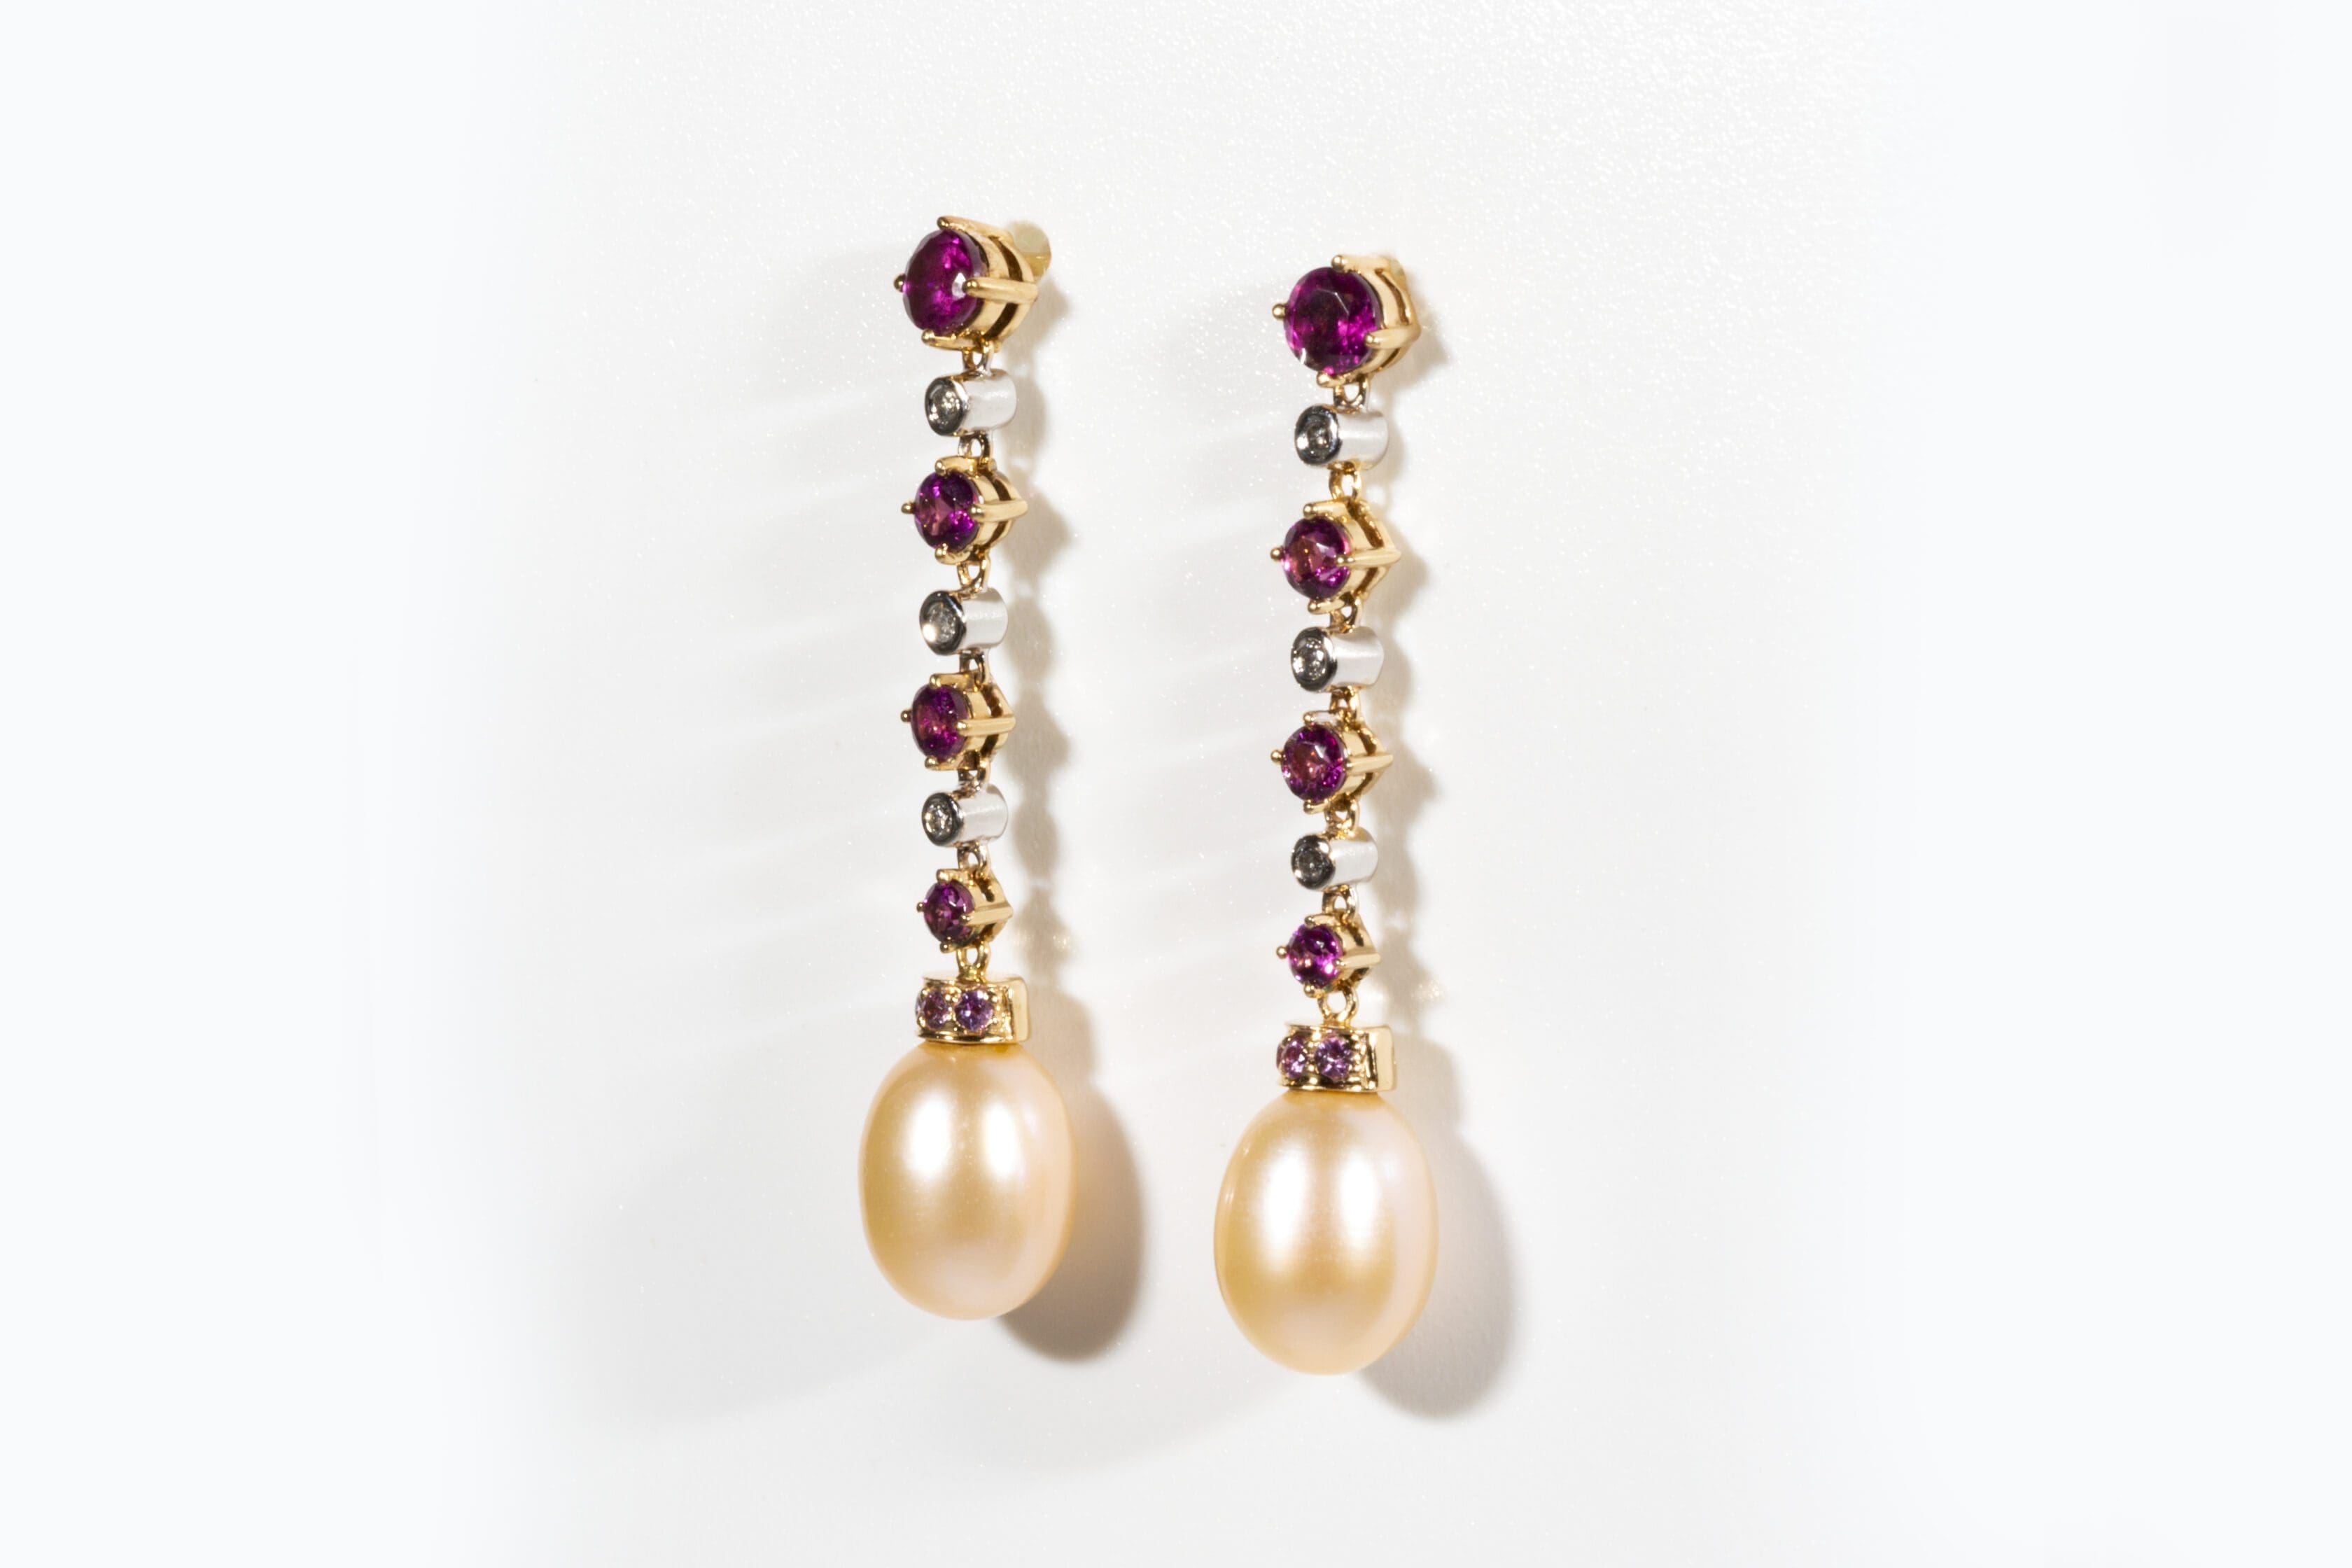 peelerie Long gold earrings with diamonds, rubies and pearls, on a white background